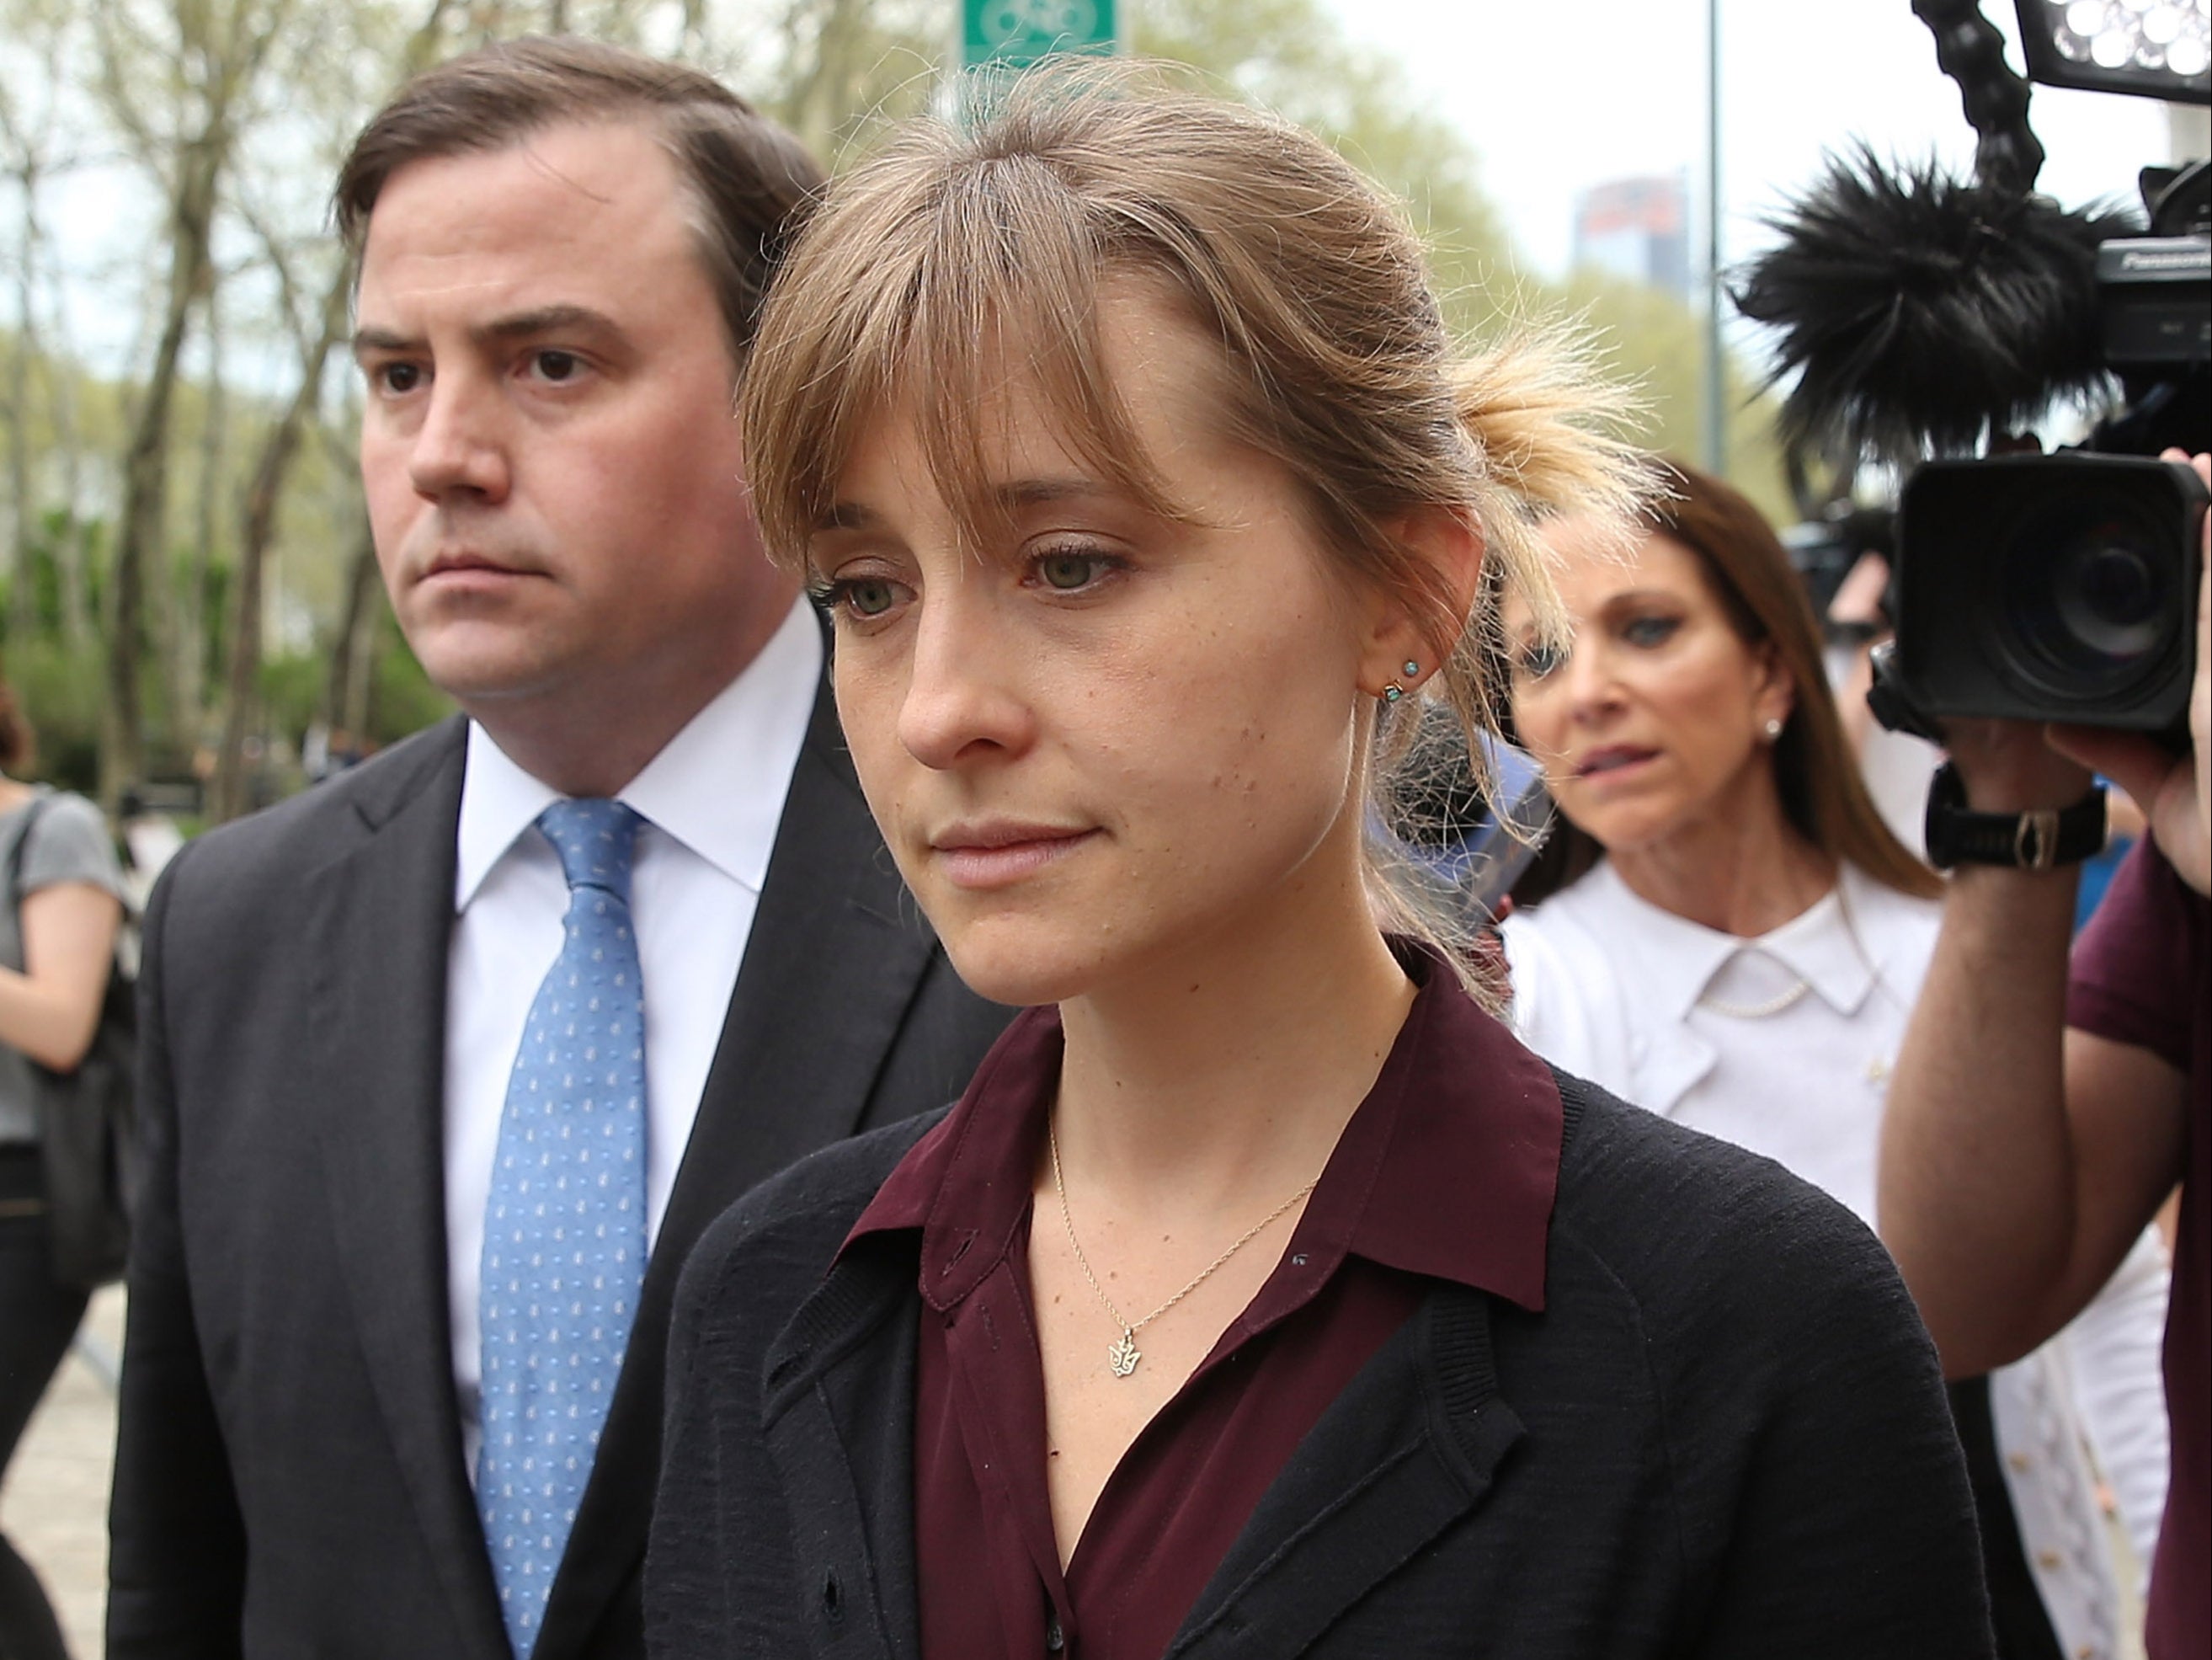 Allison Mack leaves the US Eastern District Court after a bail hearing on 4 May 2018 in Brooklyn, New York City